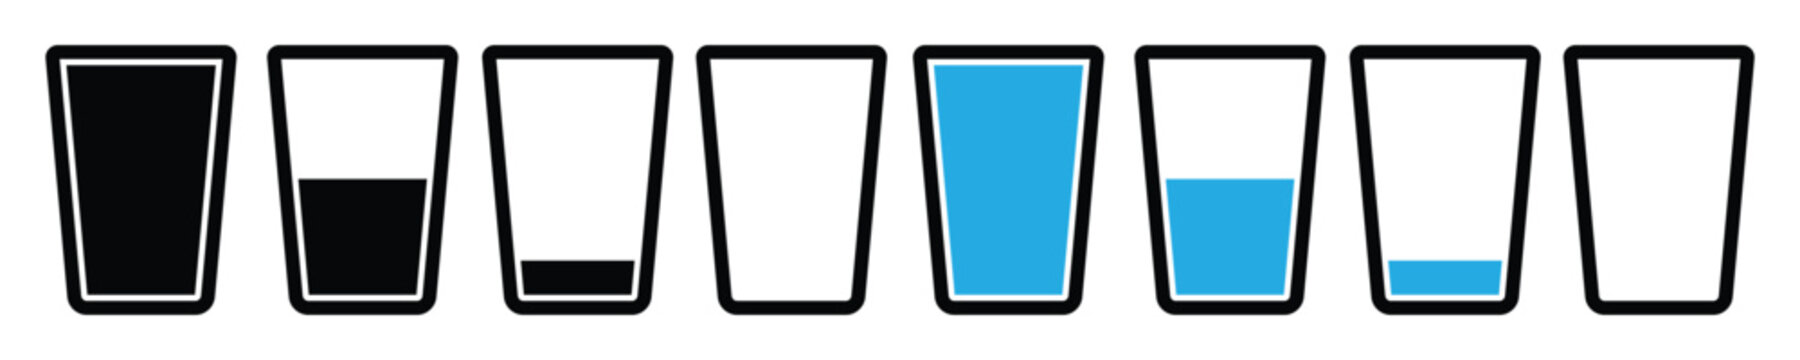 Water glass icon set in blue and black color. Milk or juice cup symbol. Waterglass vector sign. Tall glass full of water icon.